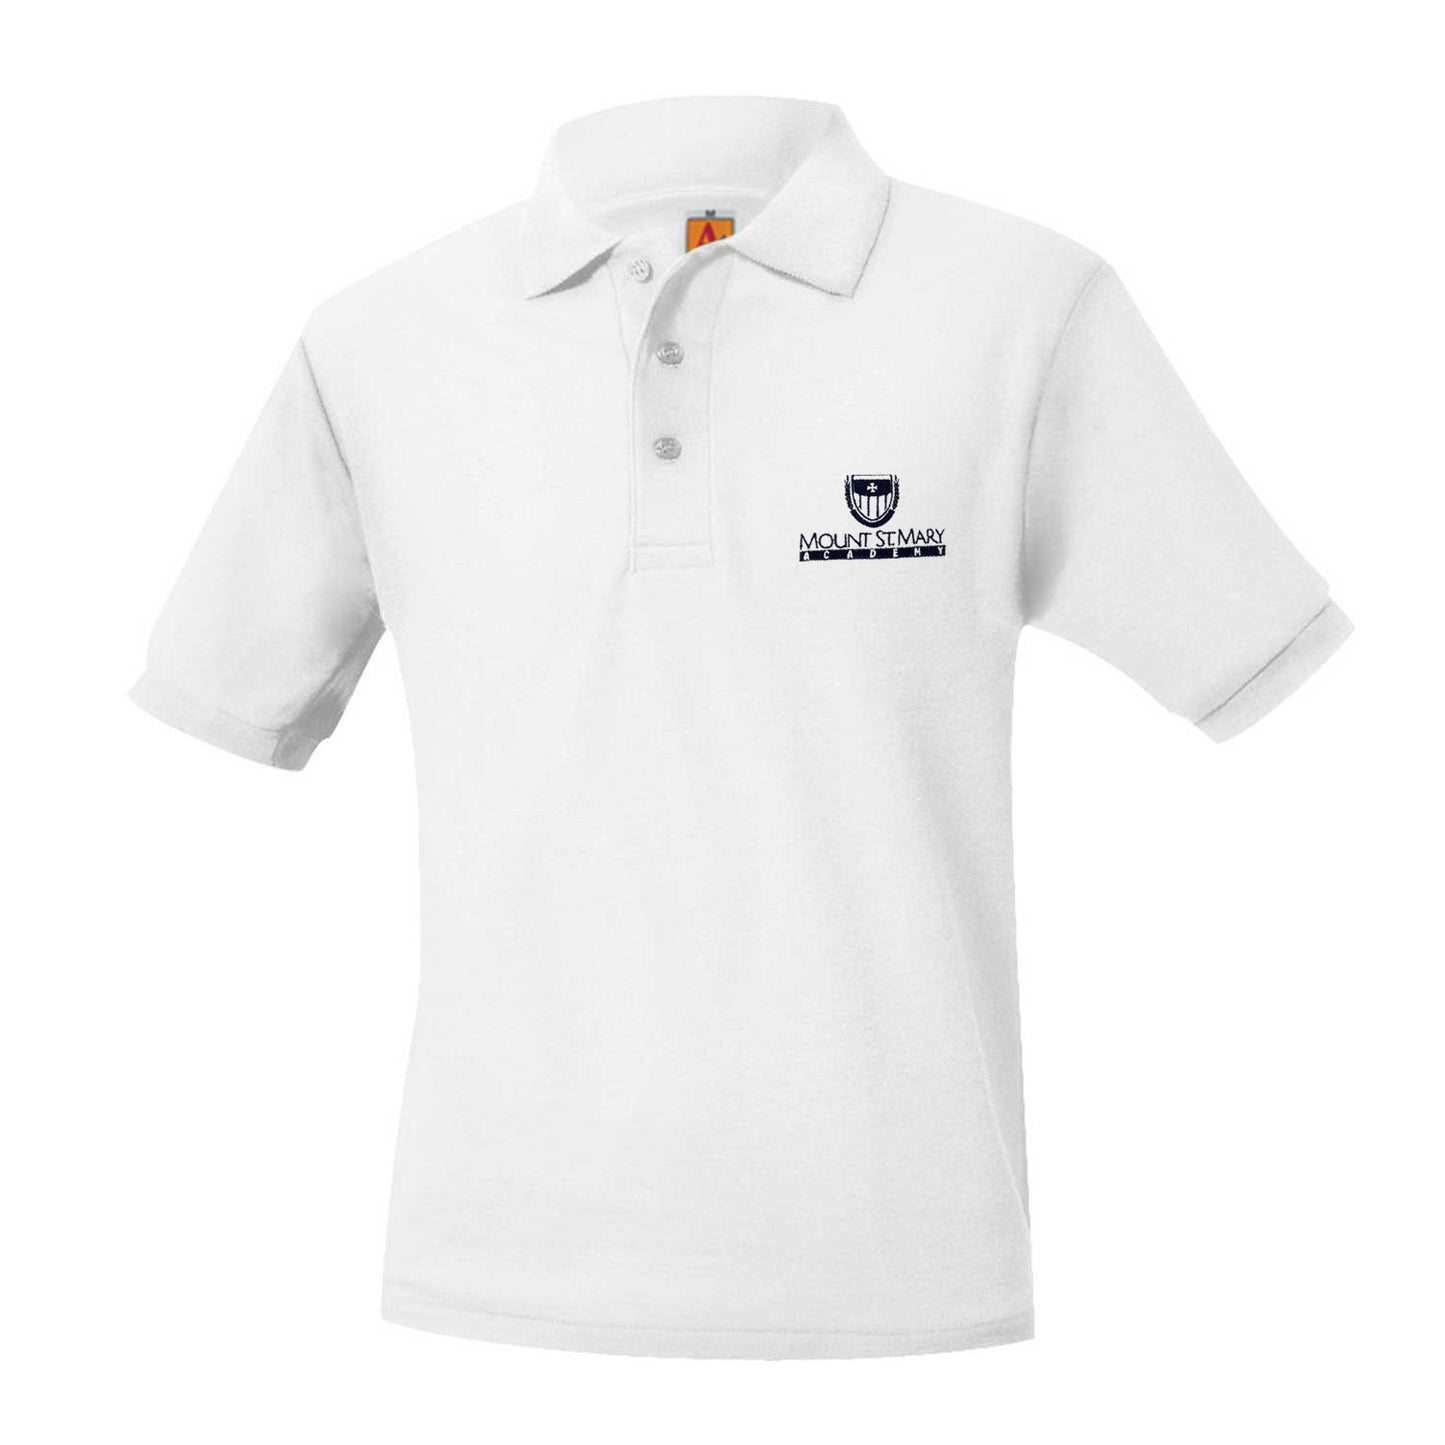 Youth Short Sleeve Pique Polo With Mount St. Mary's Logo